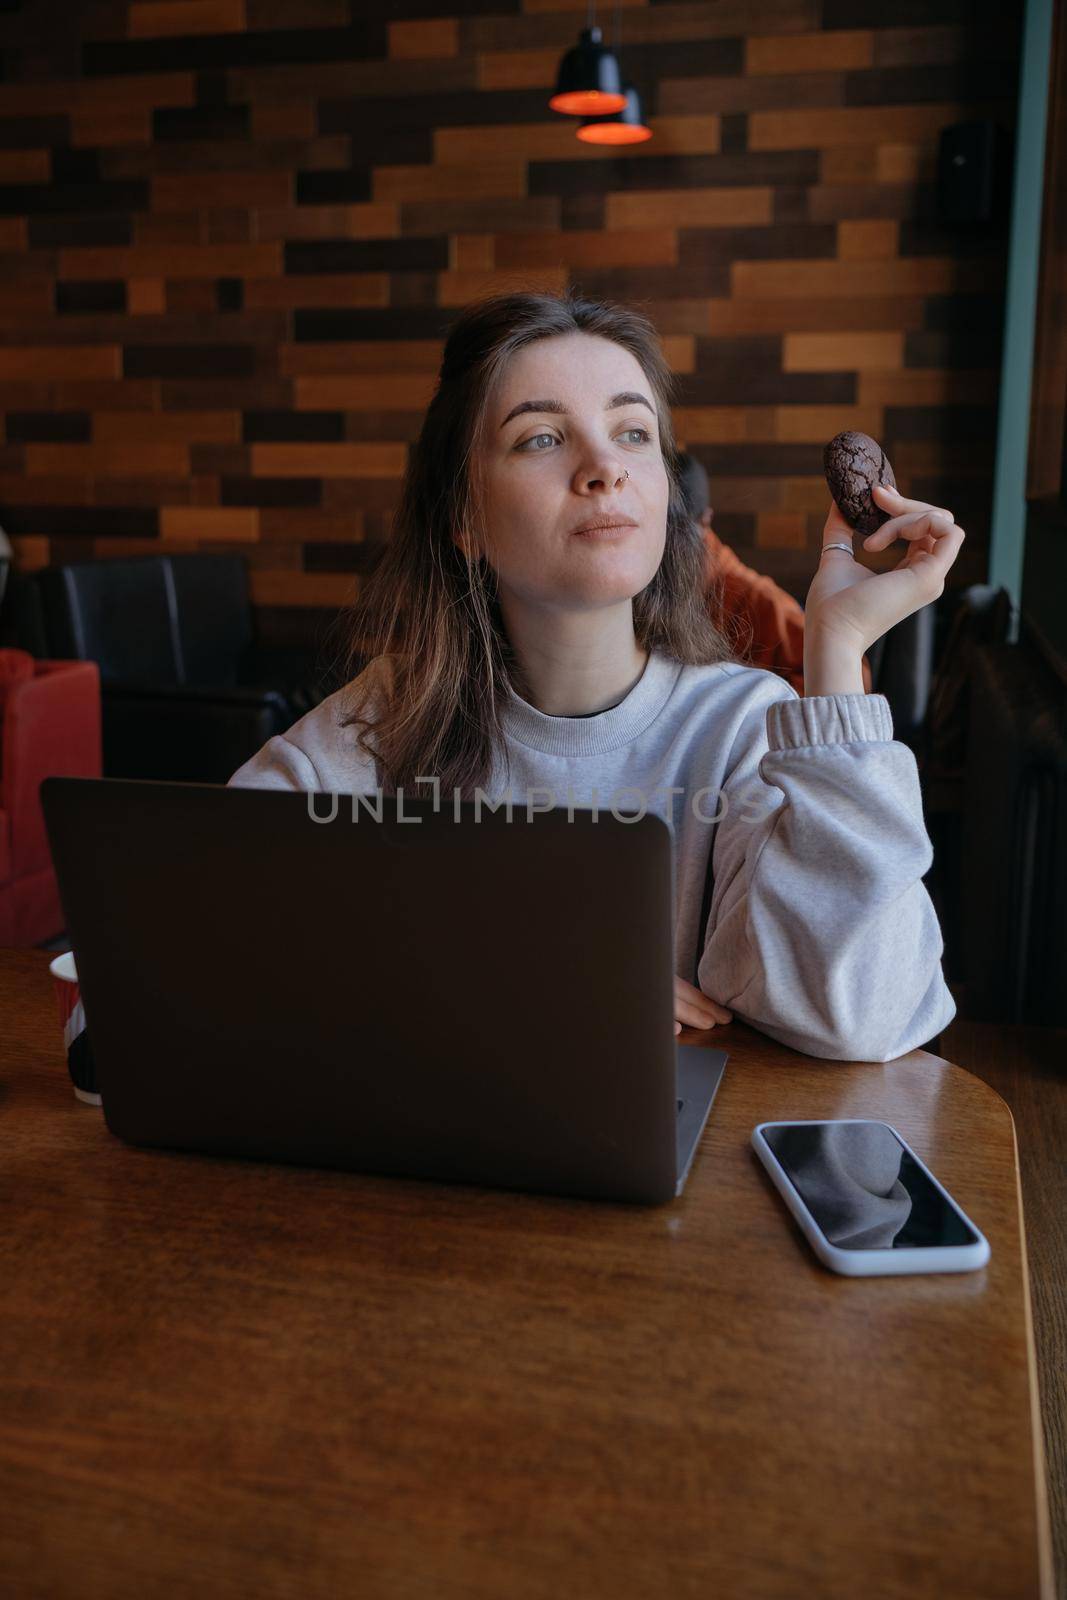 freelance woman happy working in a cafe remotely brunette